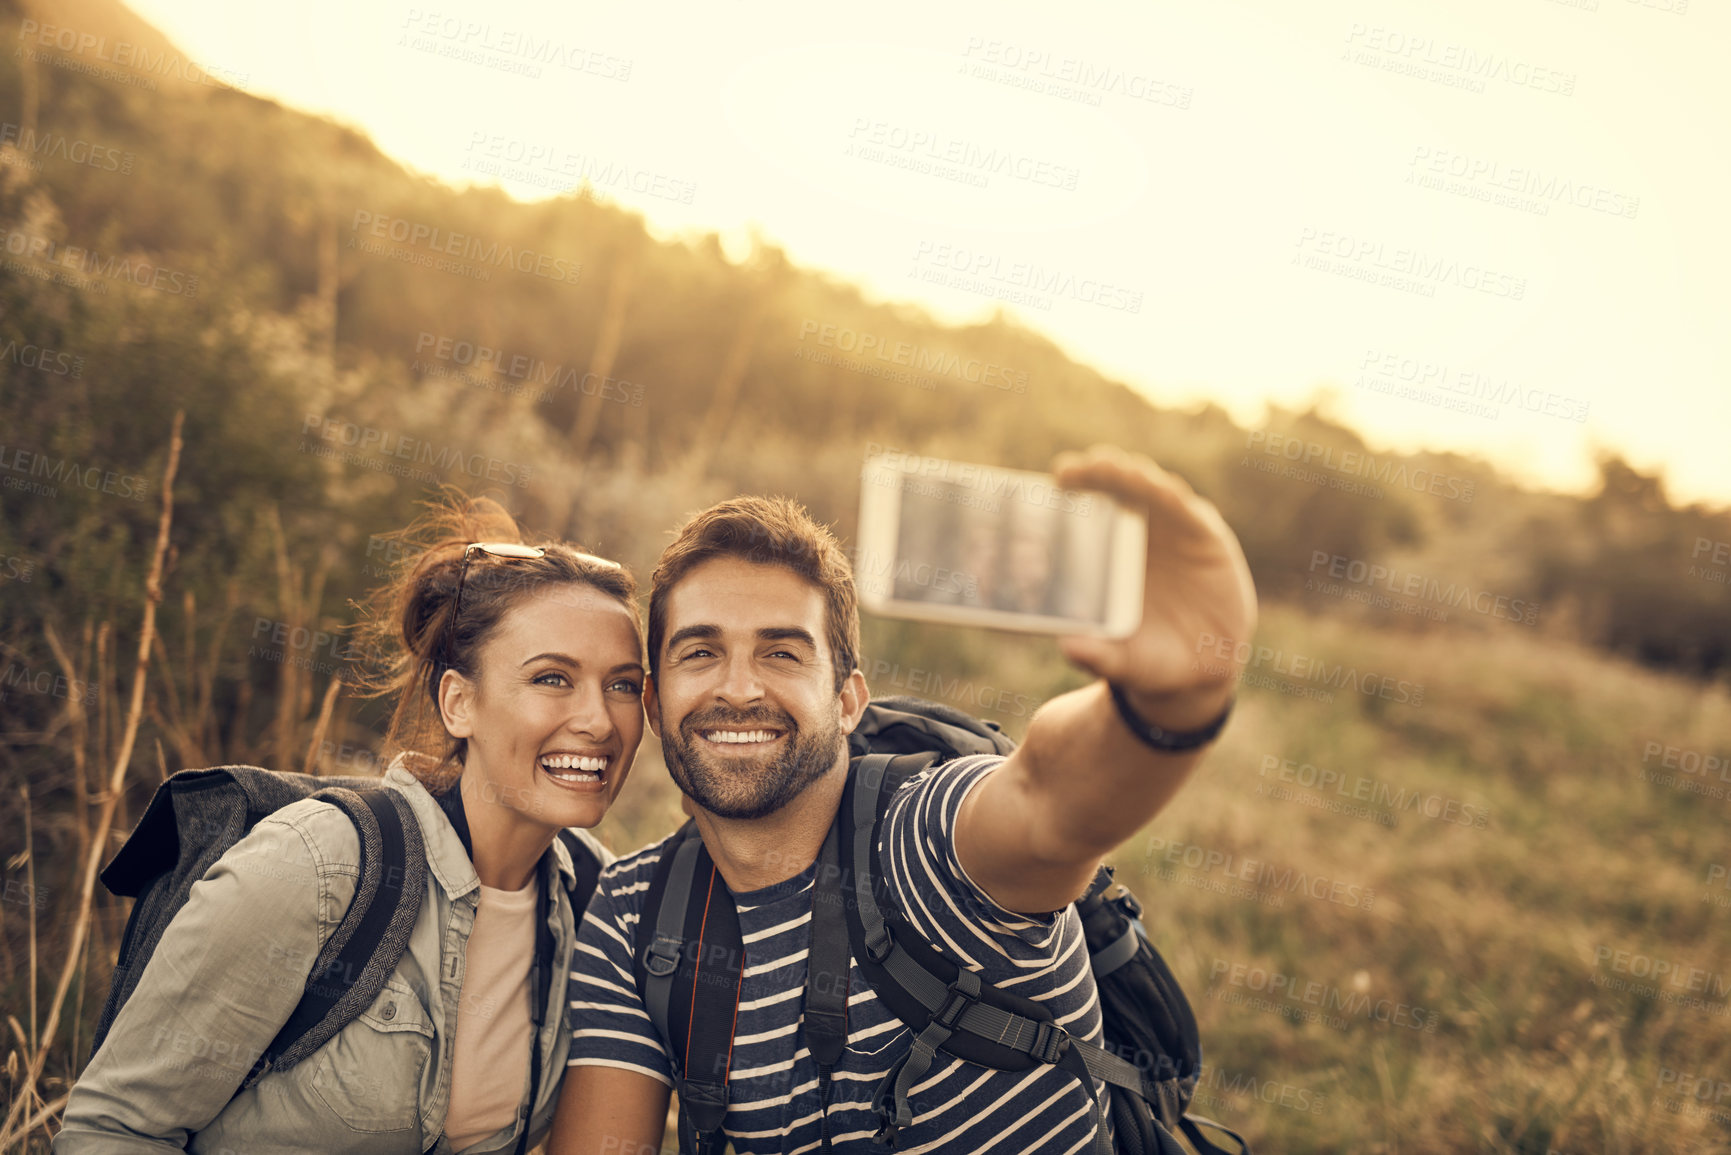 Buy stock photo Shot of a happy couple taking a selfie while out on a hiking trip